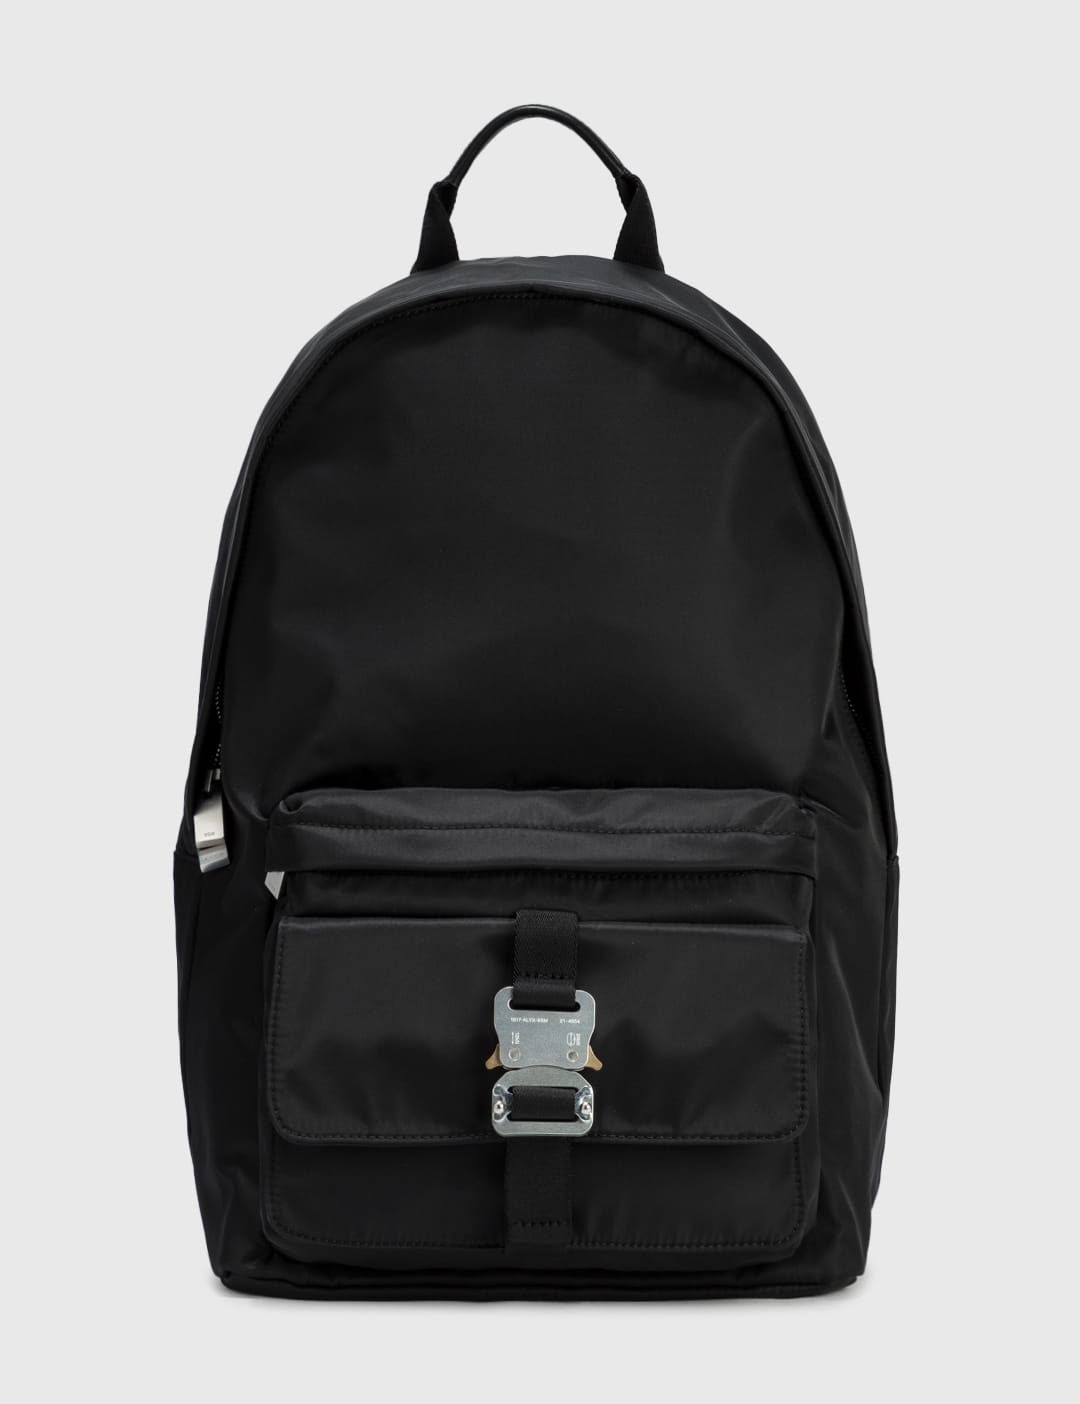 1017 ALYX 9SM - BACKPACK - X | HBX - Globally Curated Fashion and